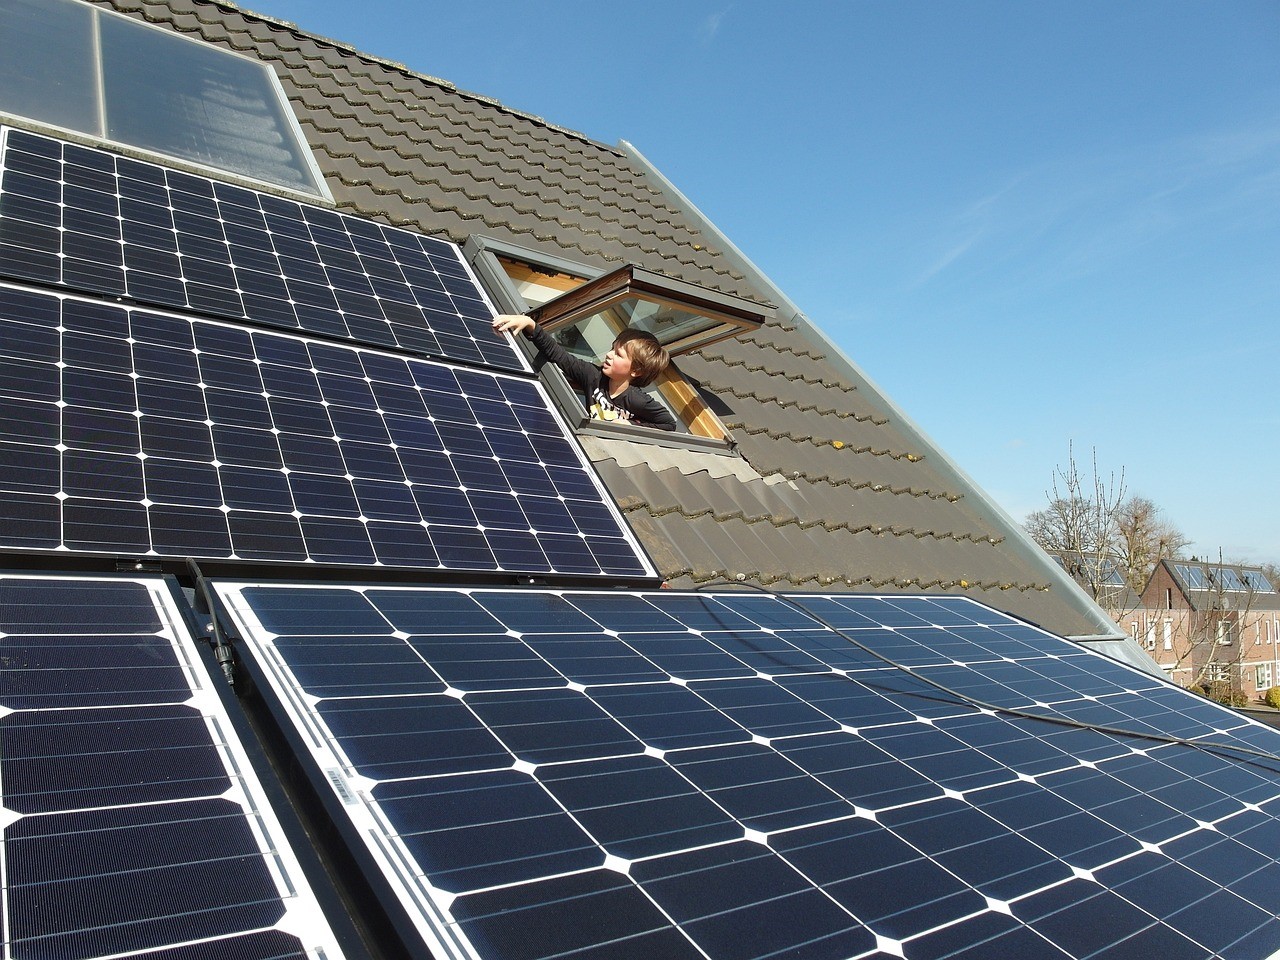 How Durable Are Solar Panels?